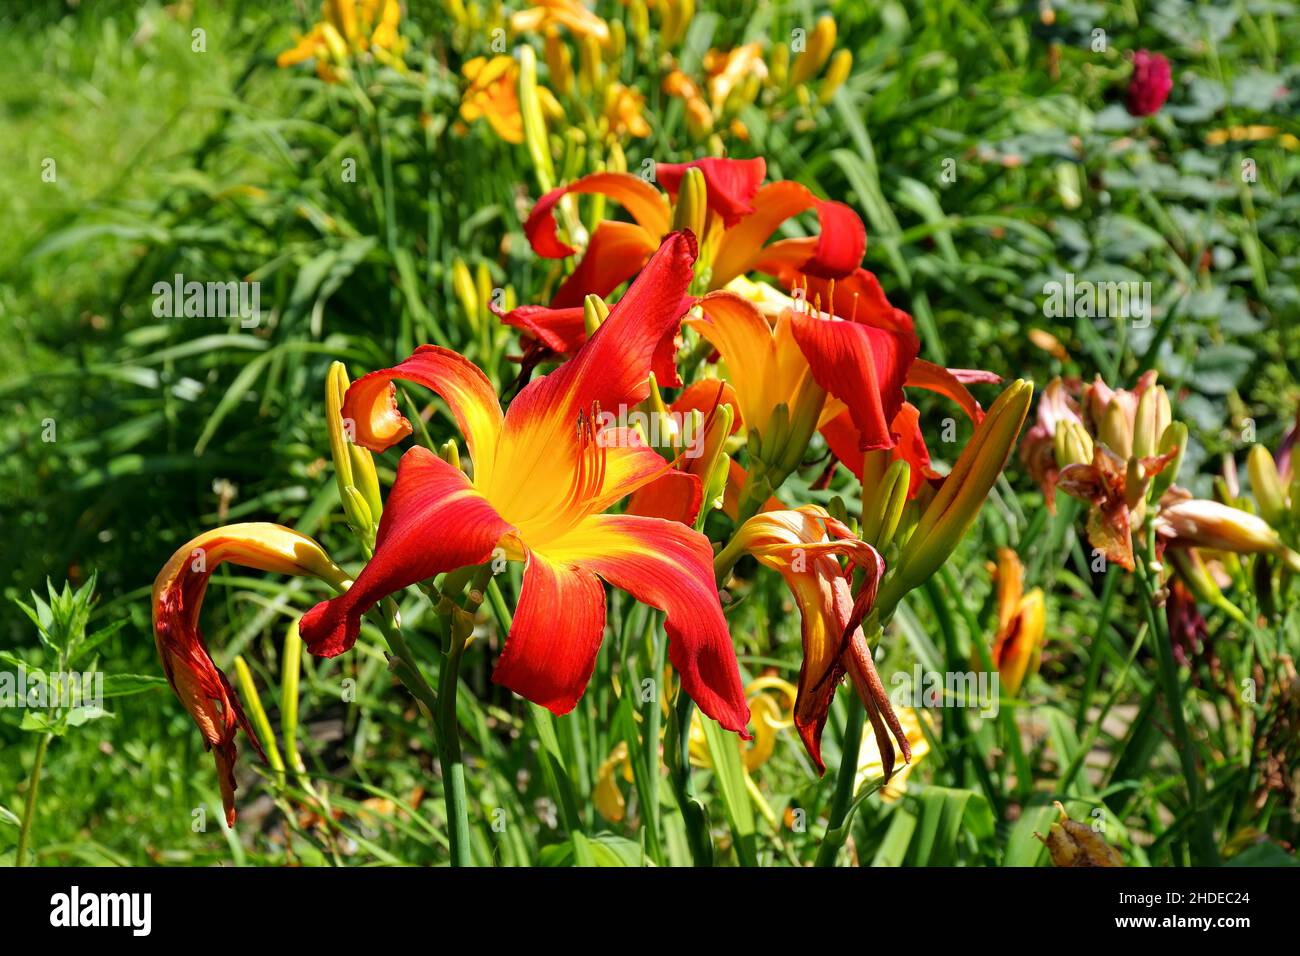 daylily of the species Red Suspenders in summer garden Stock Photo